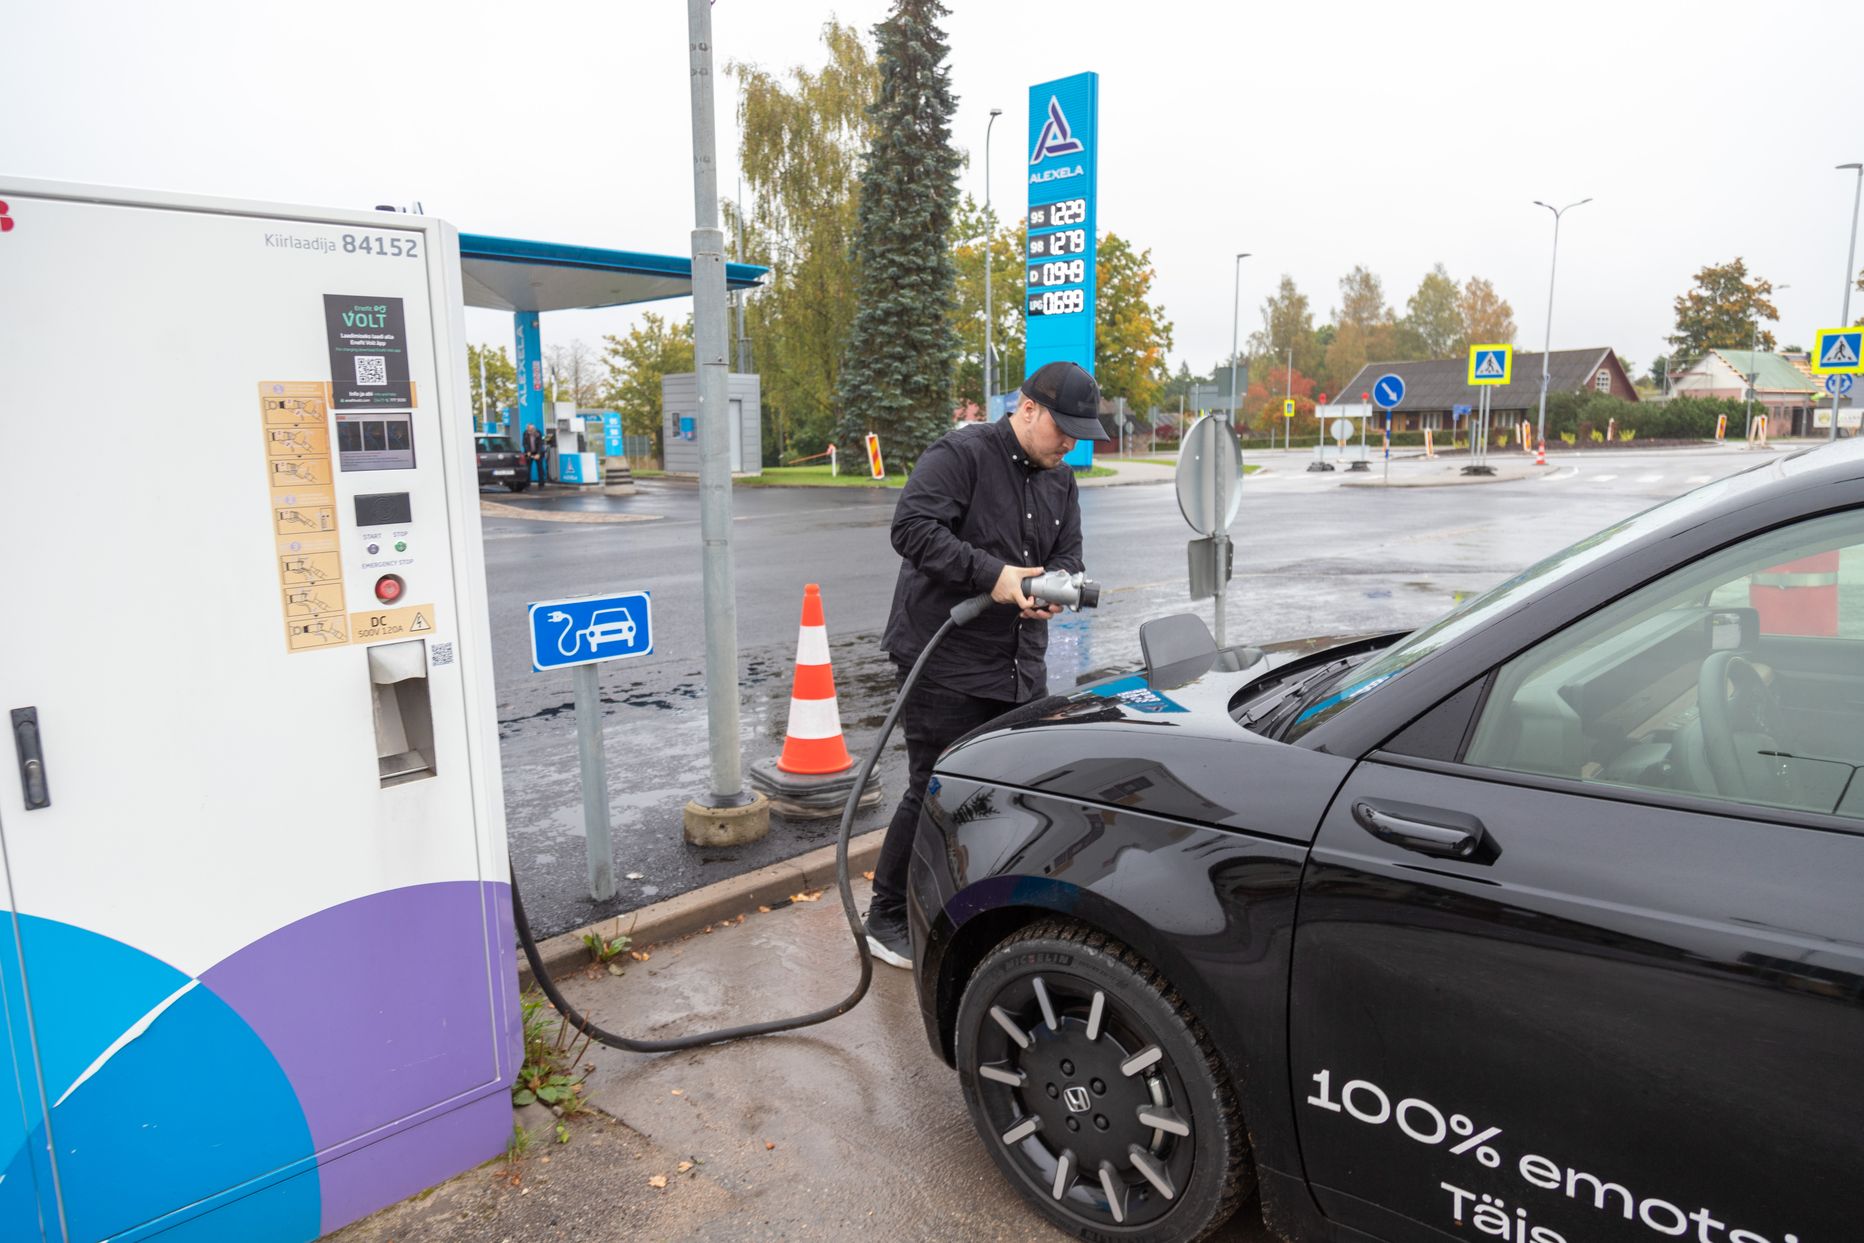 122 new charging points for electric vehicles will be built in 60 locations across Estonia.